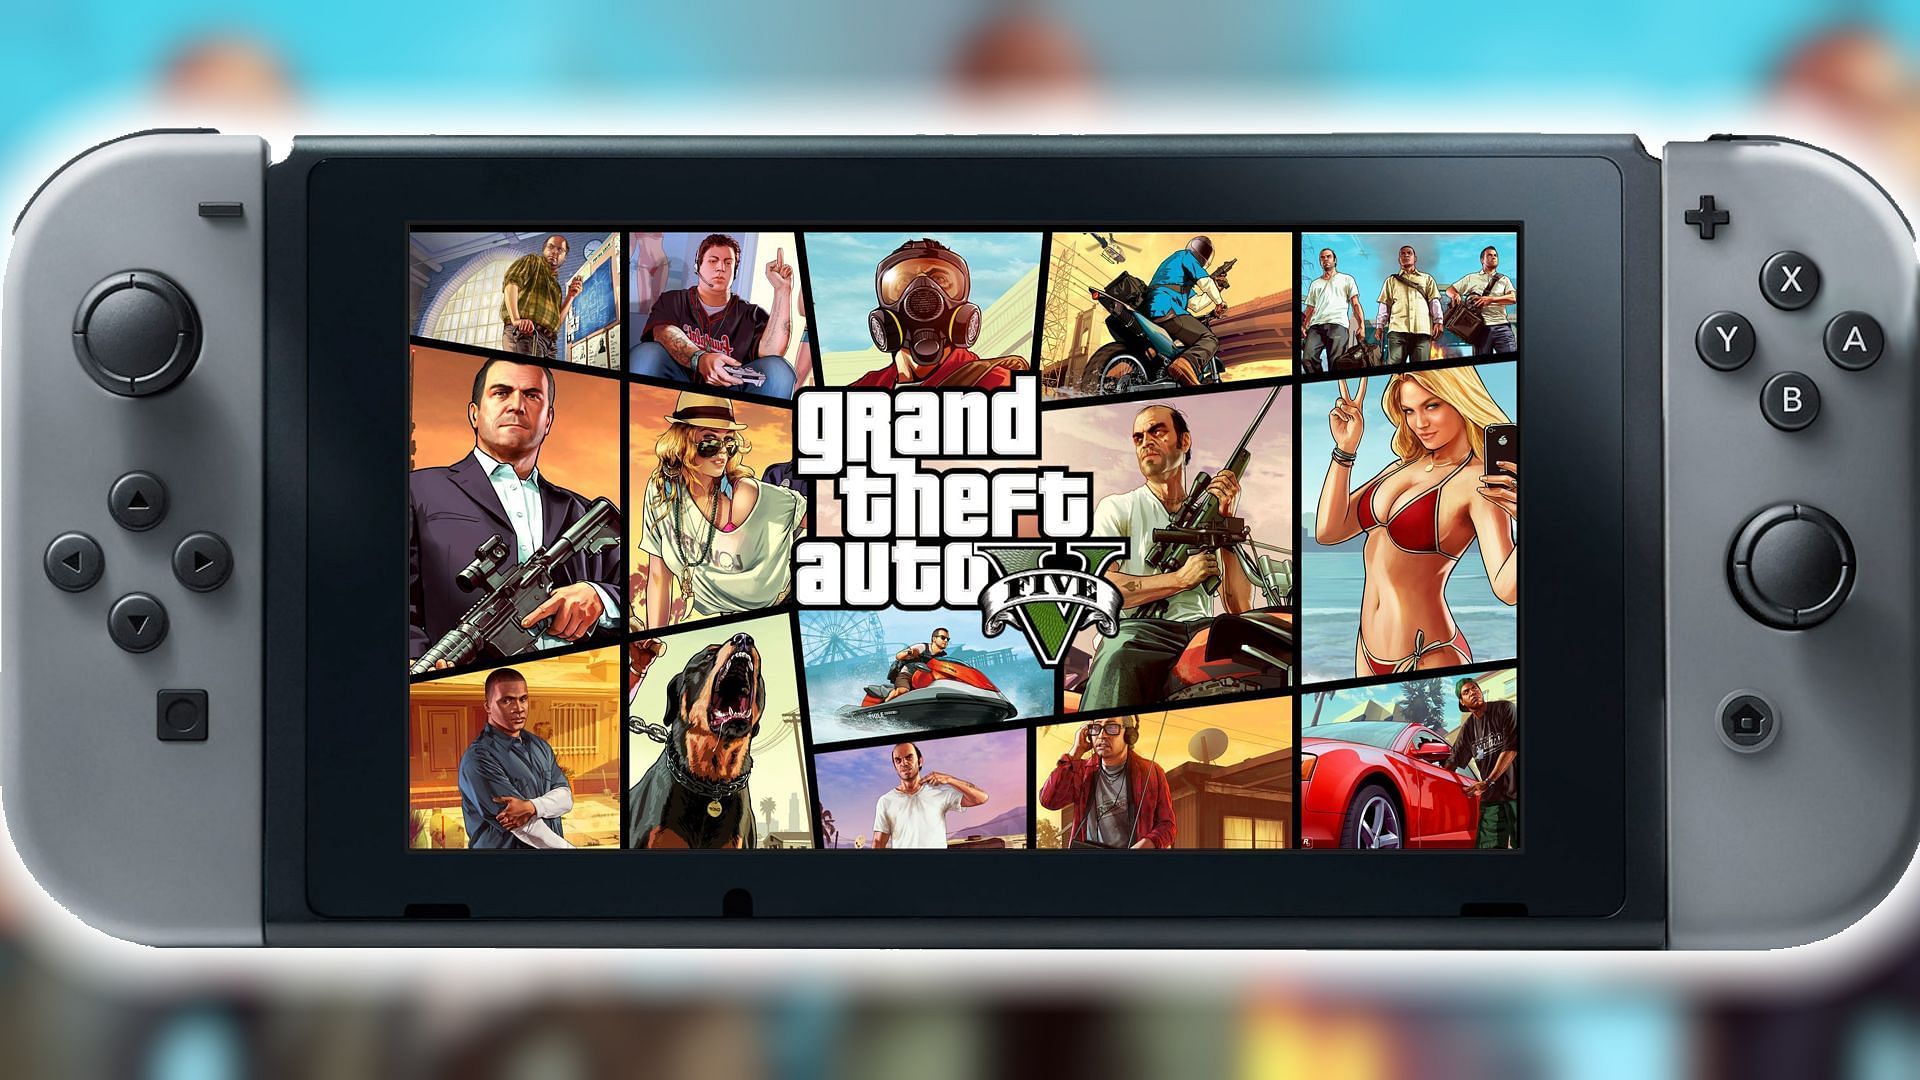 GTA 5 fans discuss a Nintendo Switch port of the game